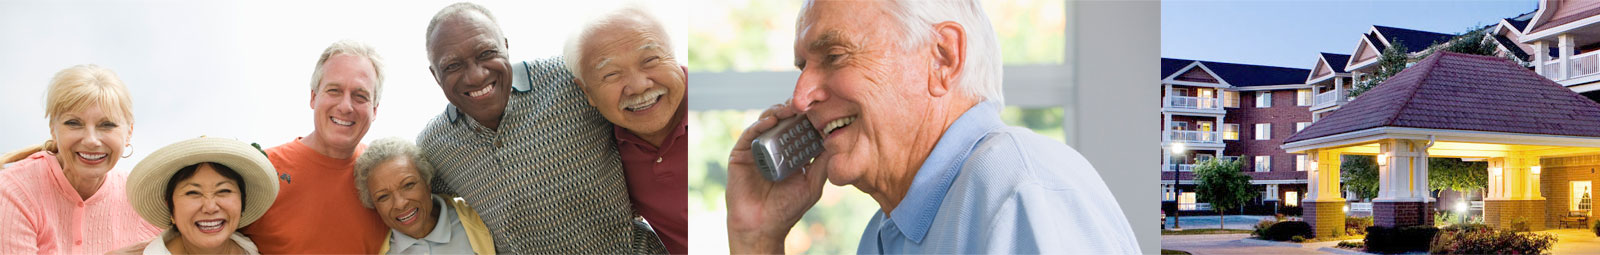 Senior Living Security Systems